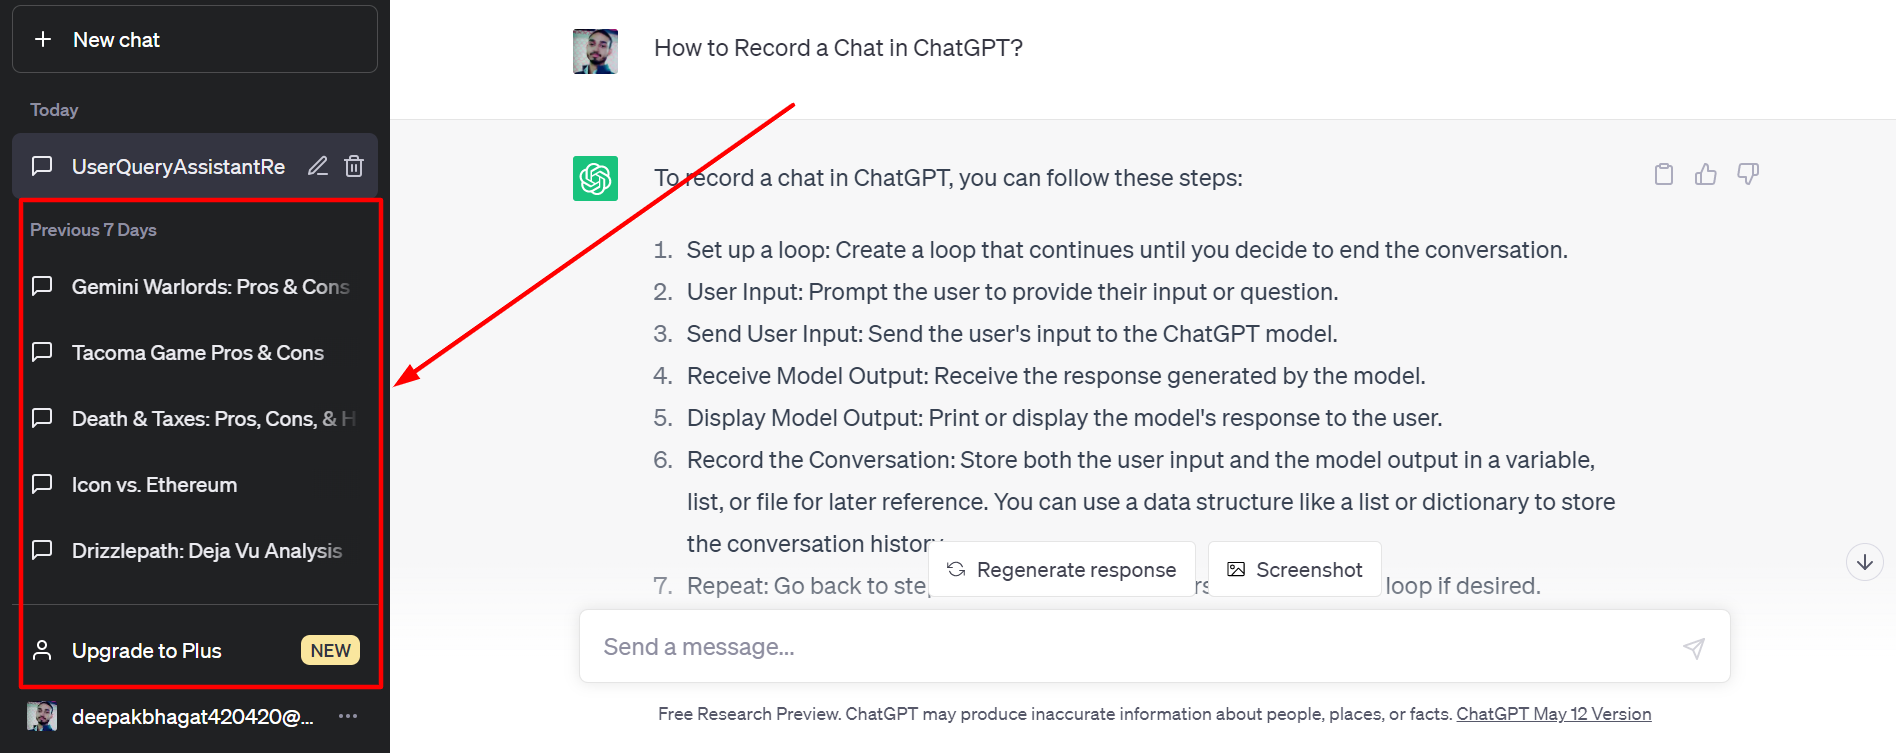 How to Record a Chat in ChatGPT?